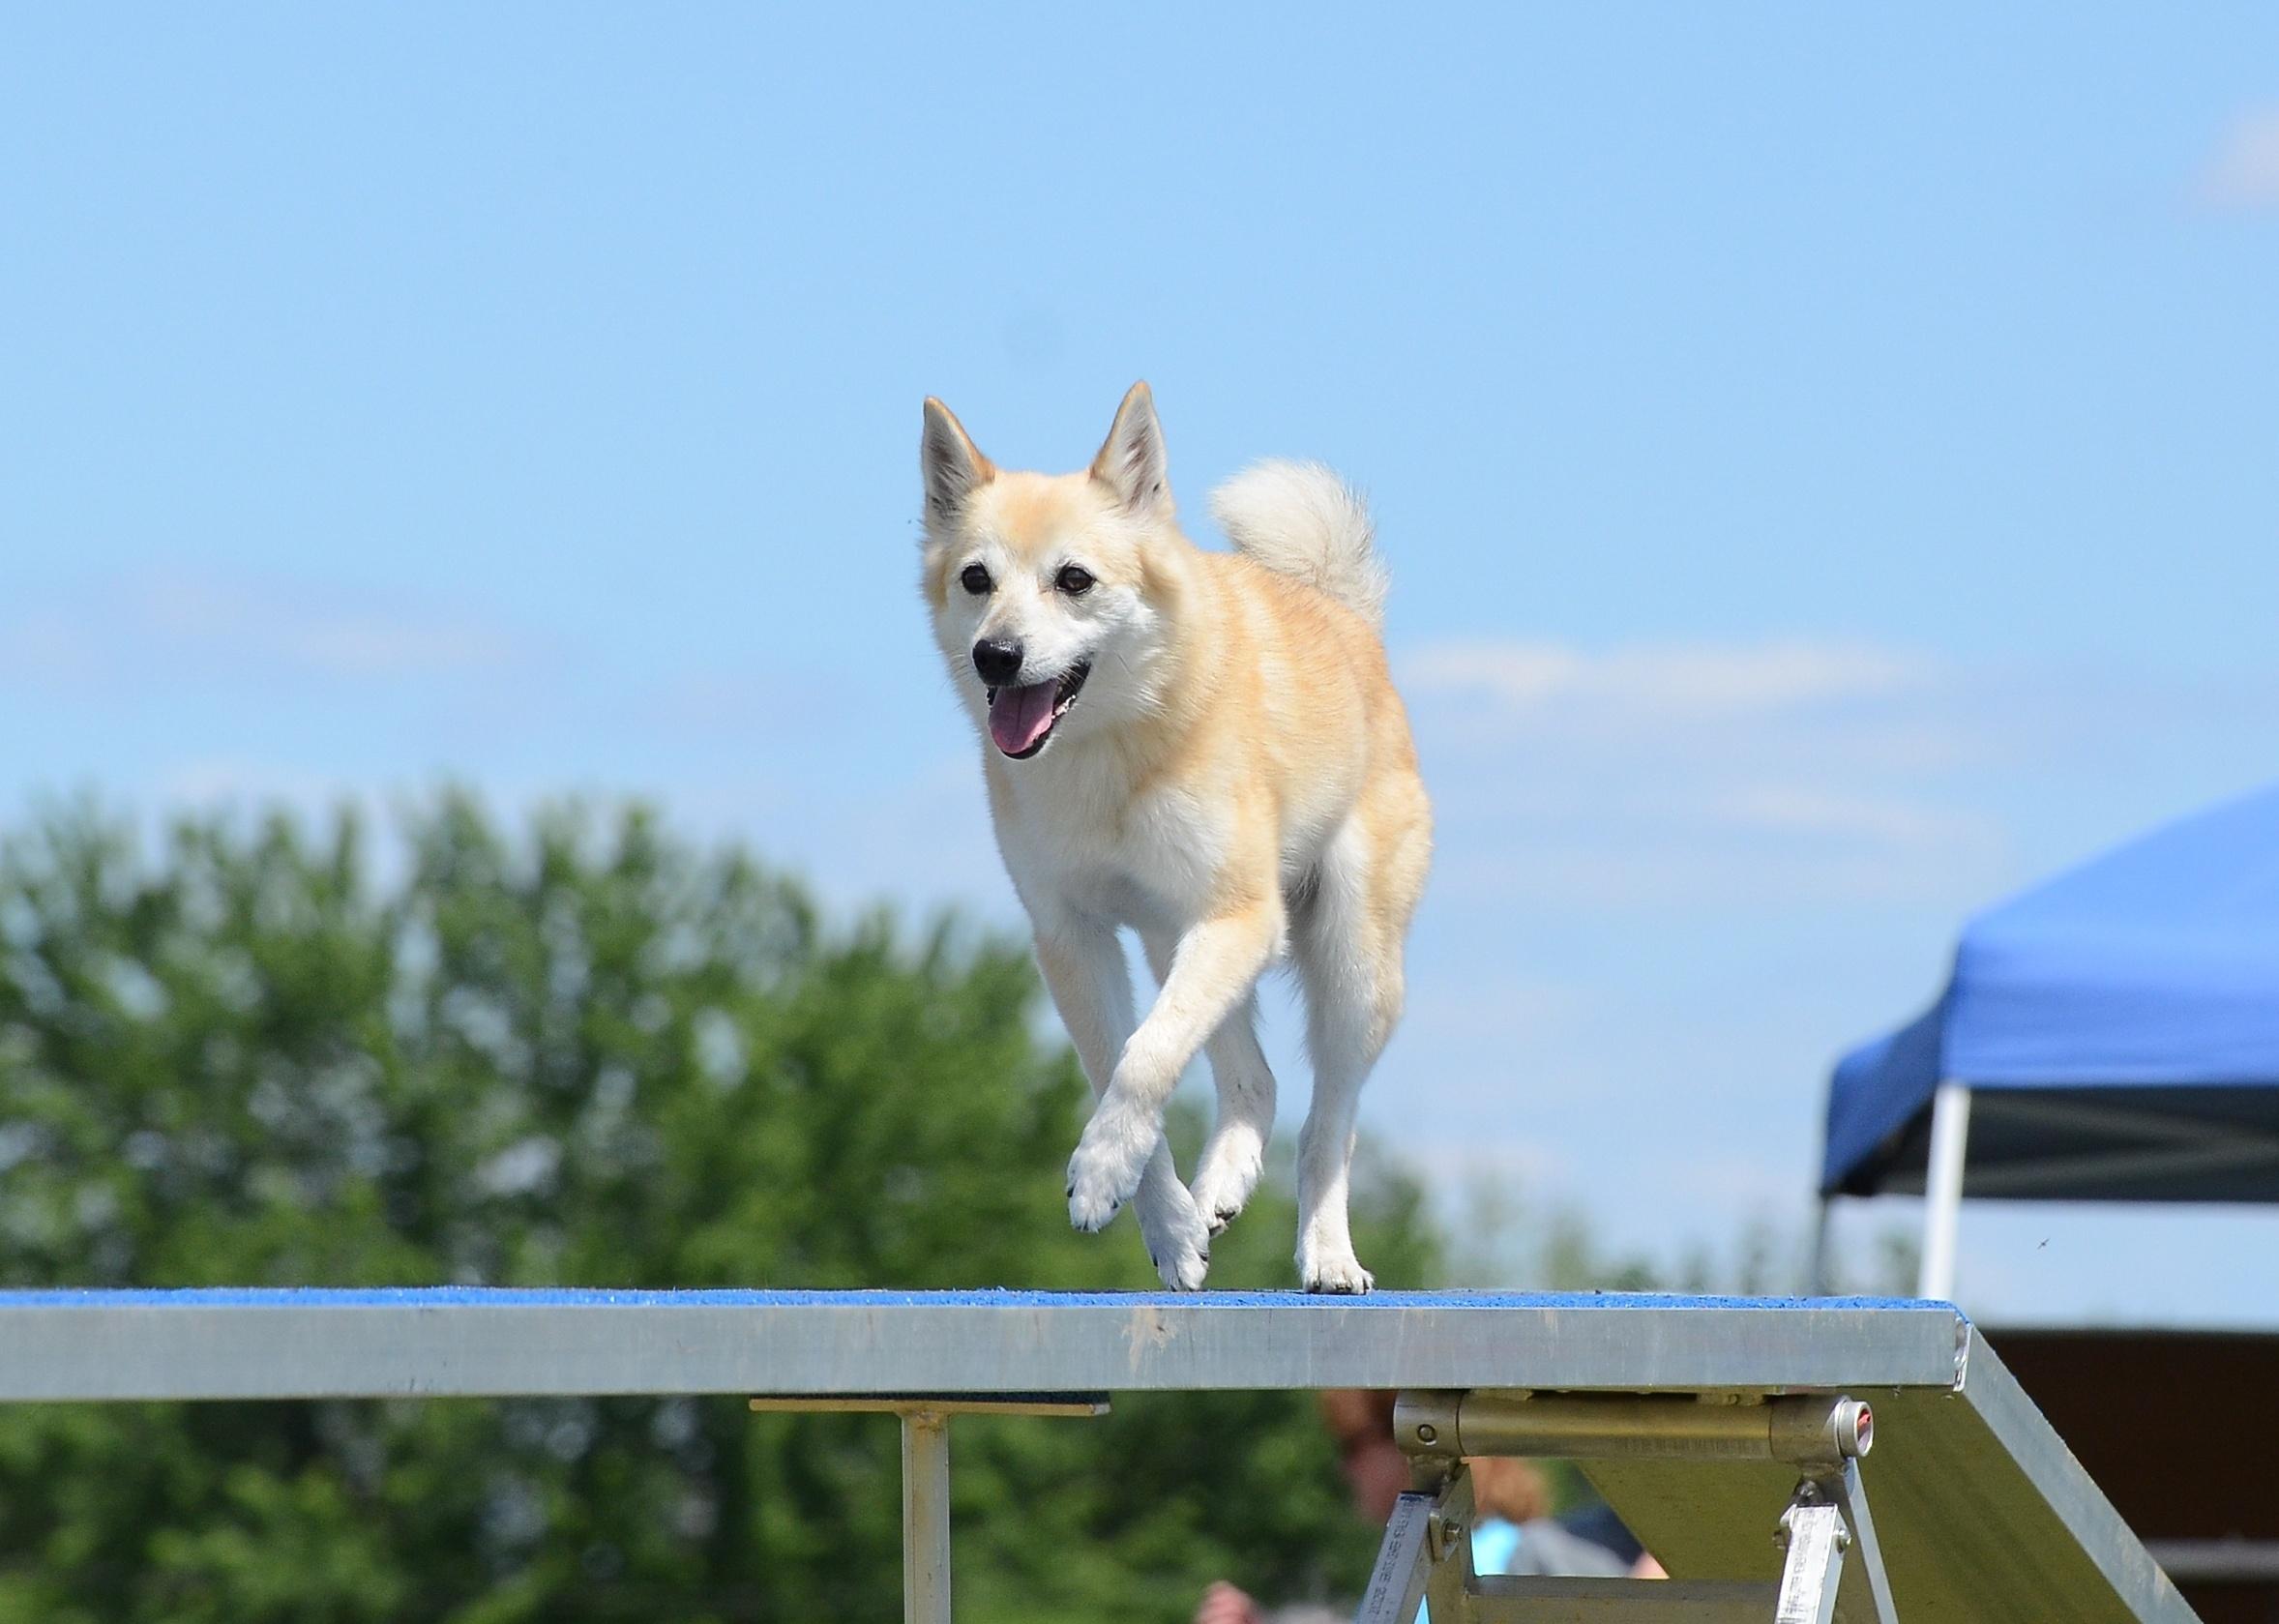 Norwegian Buhund running on a Dog Walk at an agility course.